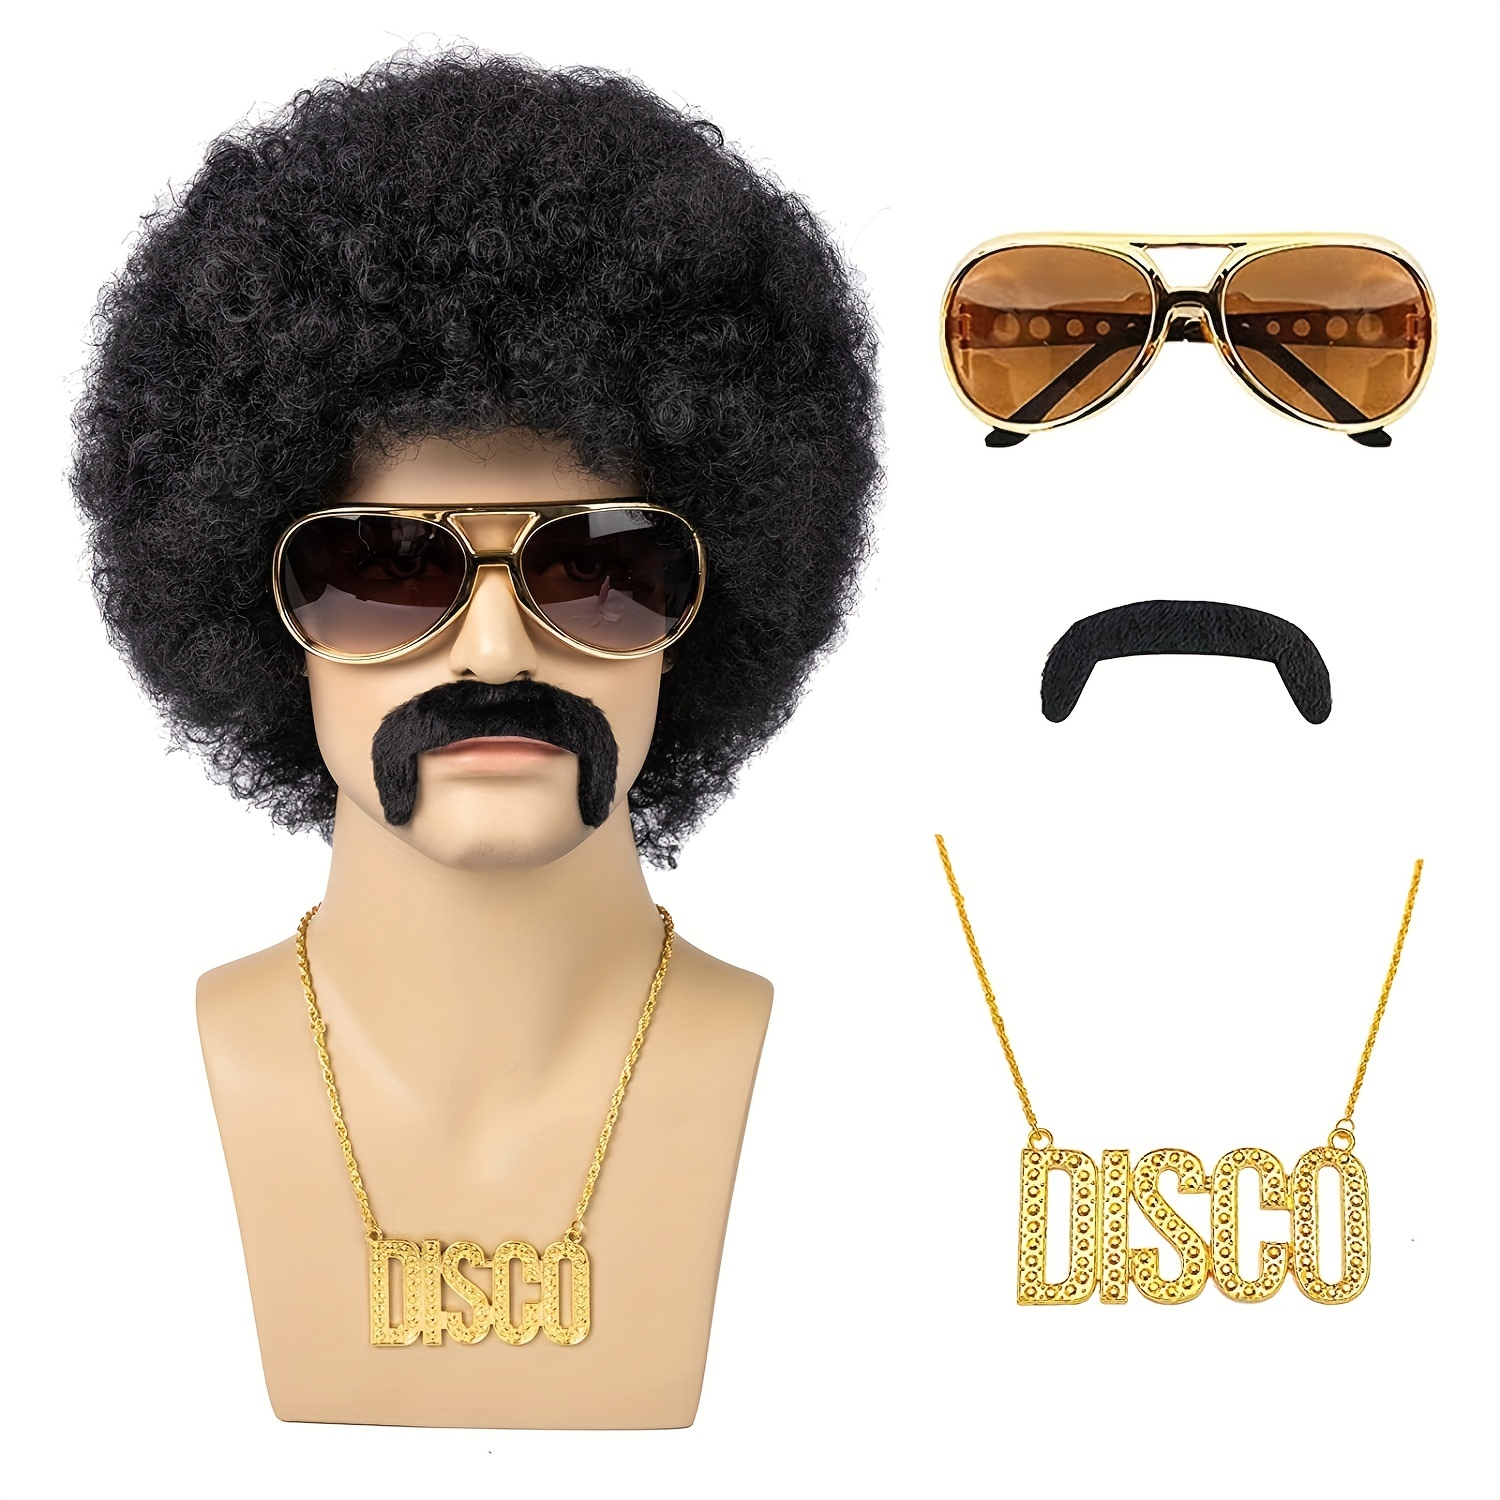 

African Wig Men's 5-piece Set (wig, Glasses, Necklace, Beard, Wig Cap) 70s Clothing Wig Disco Natural Short Black Curly Synthetic Hair Wig For Christmas Role-playing Party, Ideal Choice For Gifts